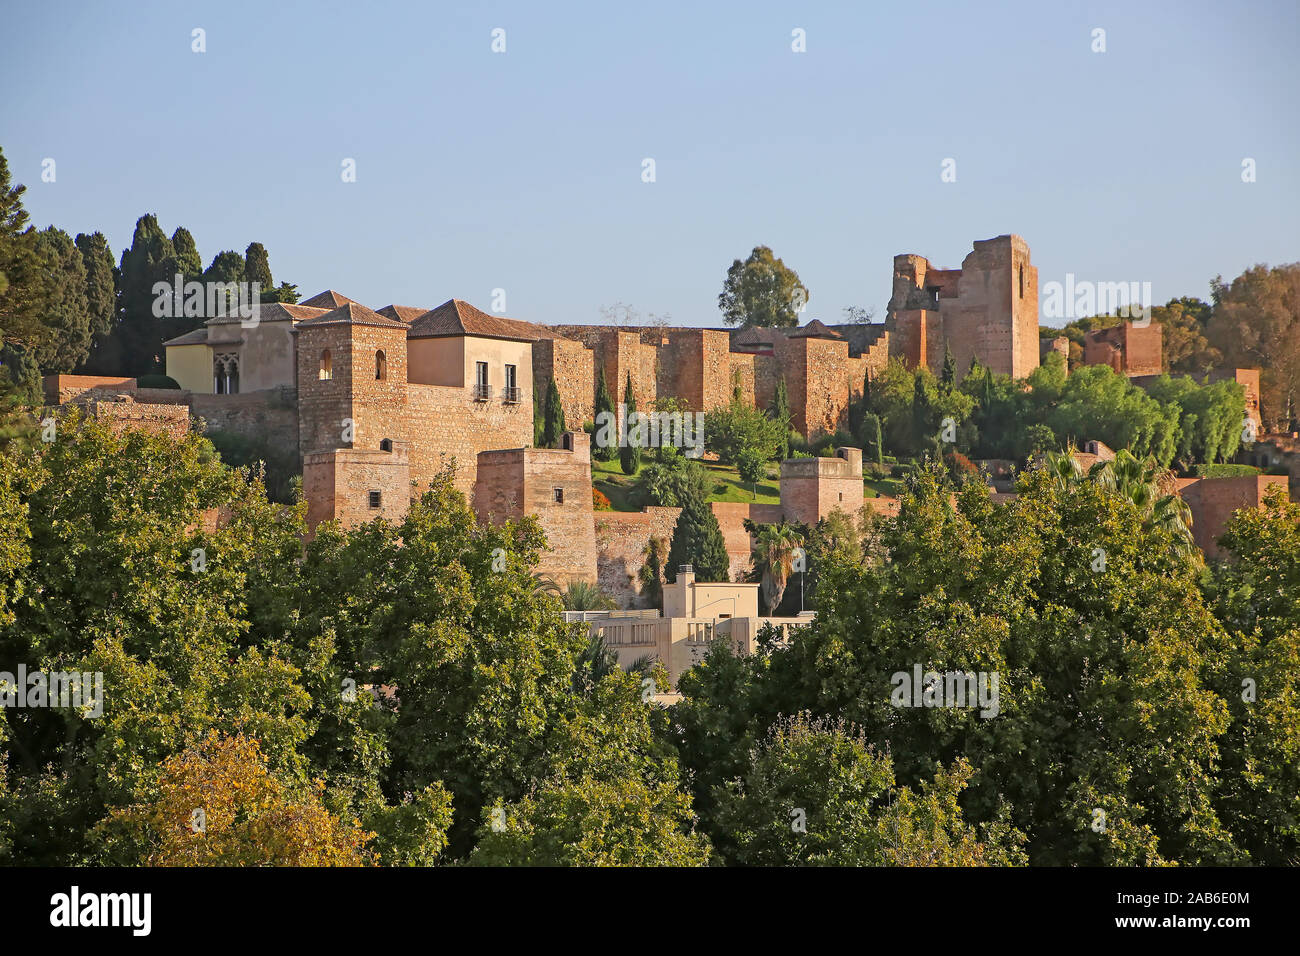 Castle of Gibralfaro which sits on the Mountain, surrounded by forest. The Castle overlooks Málaga city and the Mediterranean Sea, in  Andalusia, Sout Stock Photo